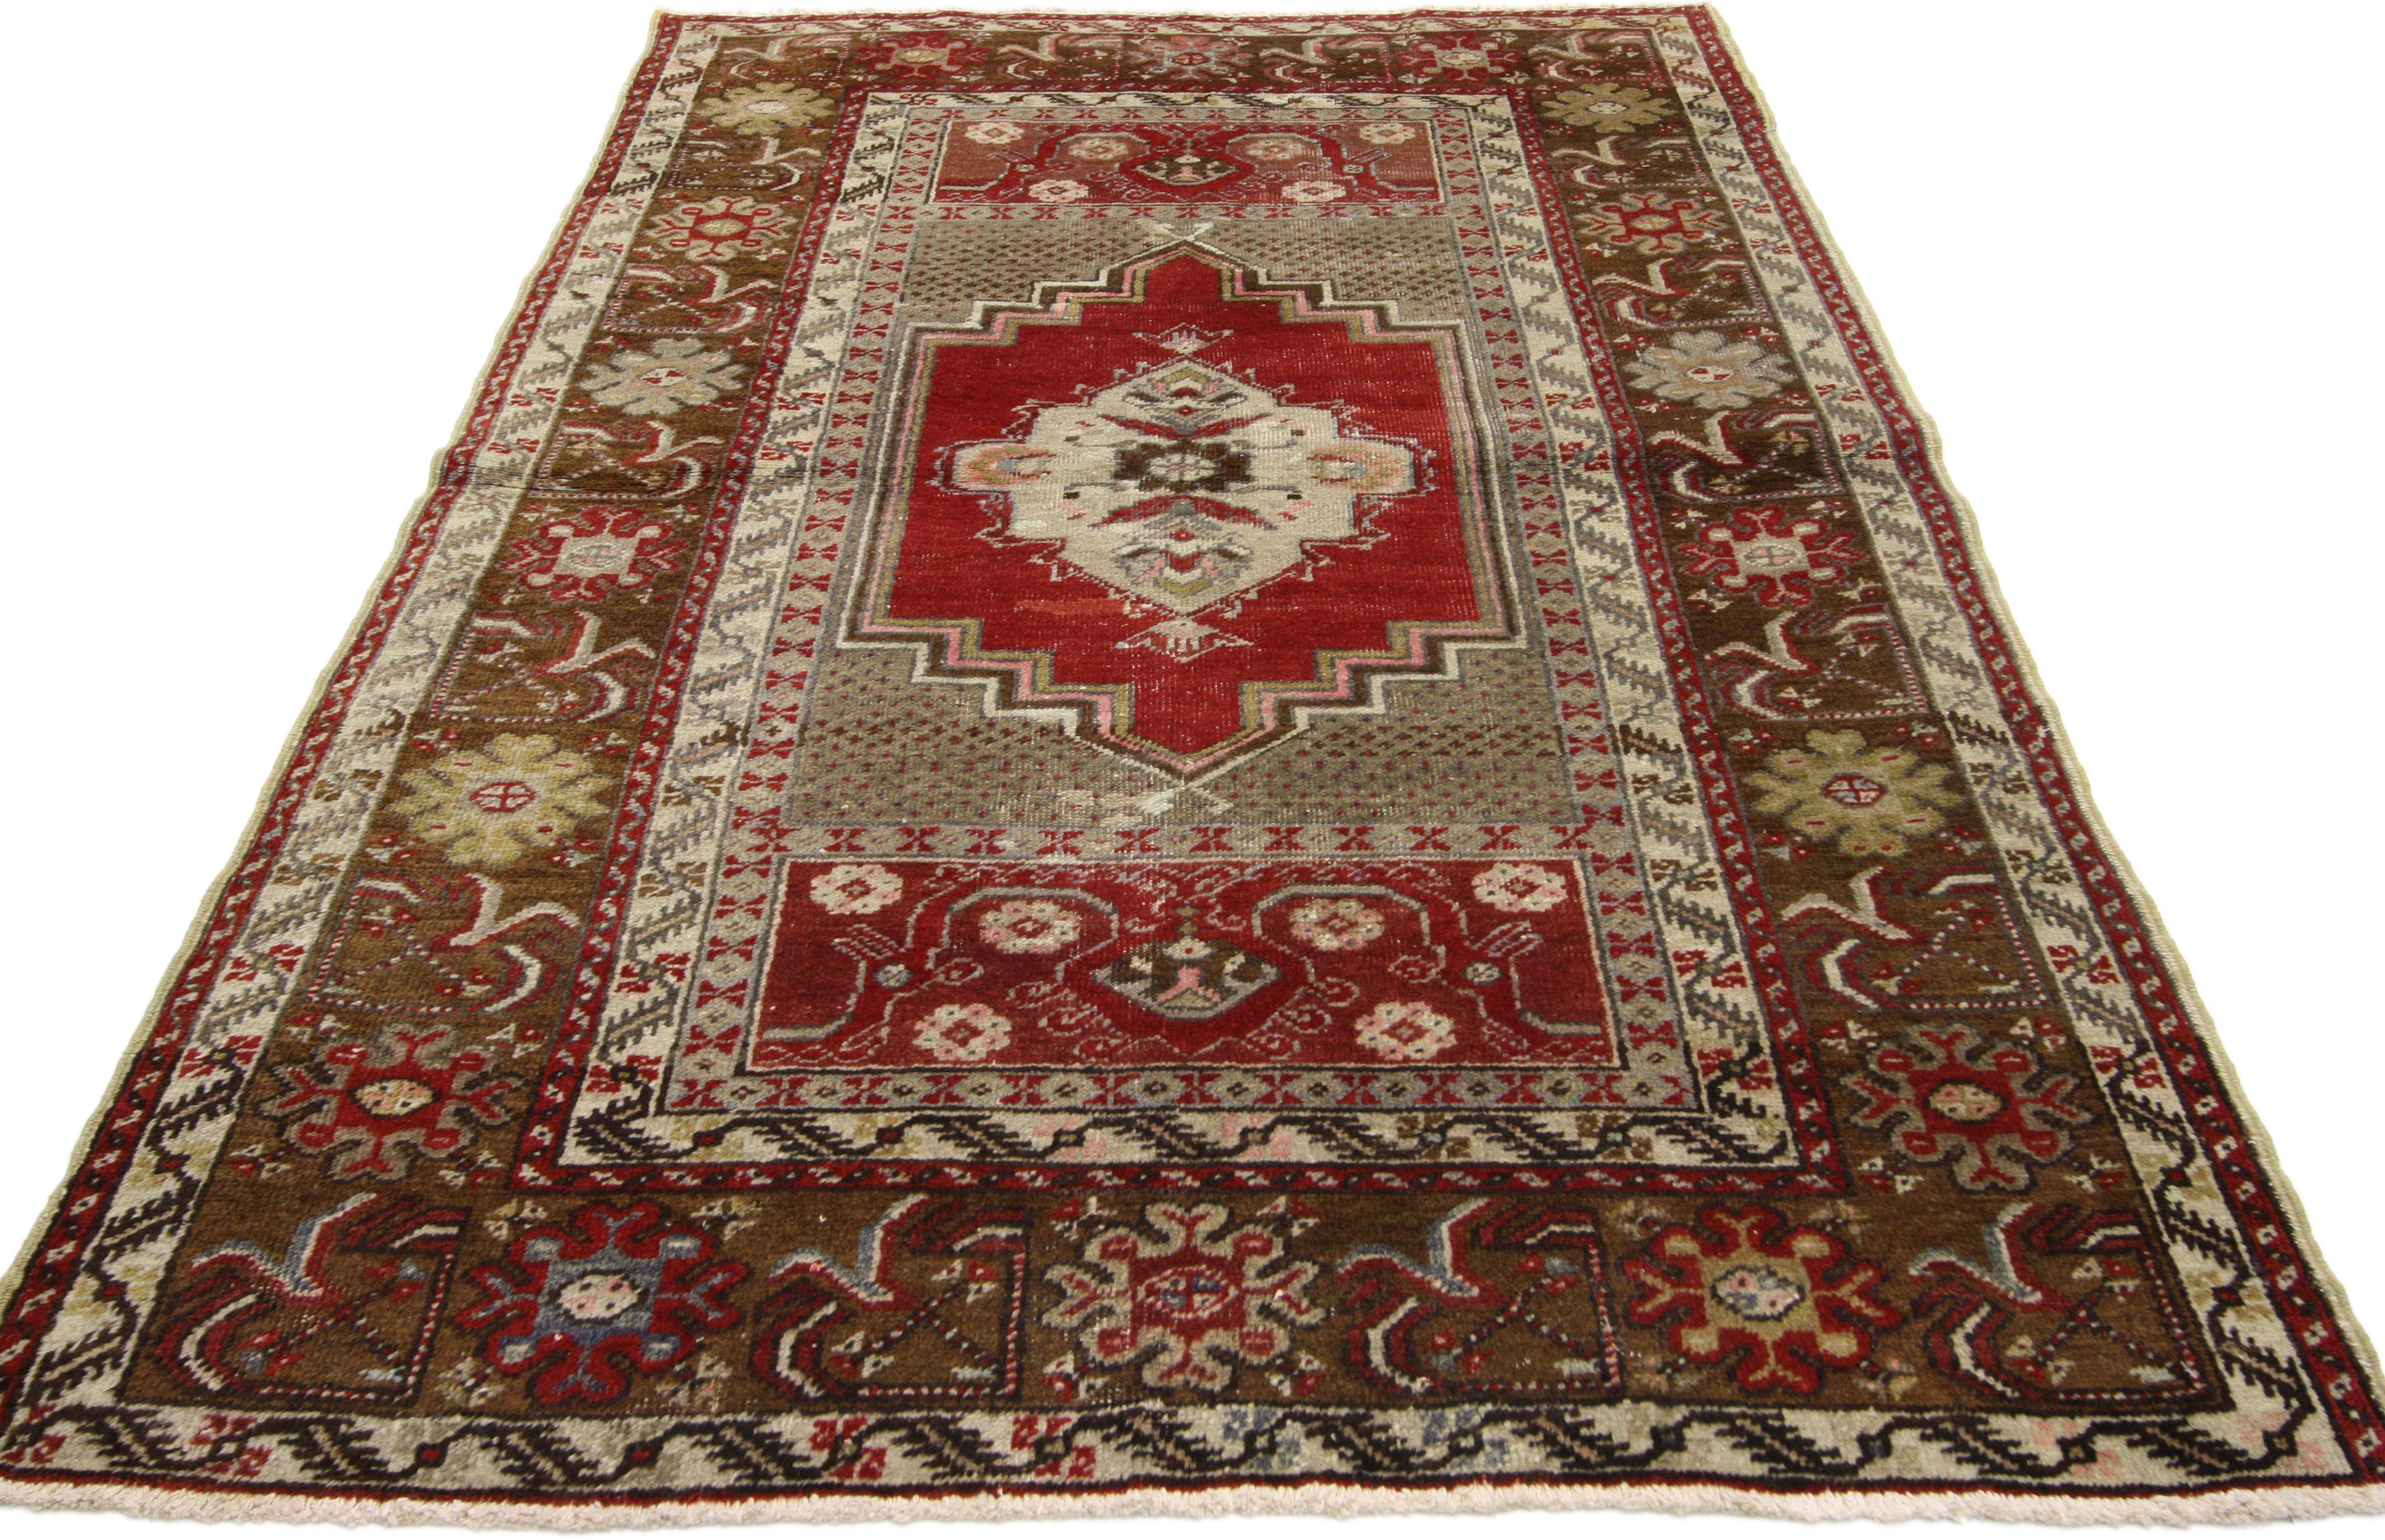       50149 Vintage Turkish Oushak Accent rug with Traditional Style. Warm and inviting, this hand-knotted wool vintage Turkish Oushak rug features a modern traditional style. Immersed in Anatolian history and refined colors, this vintage Oushak rug